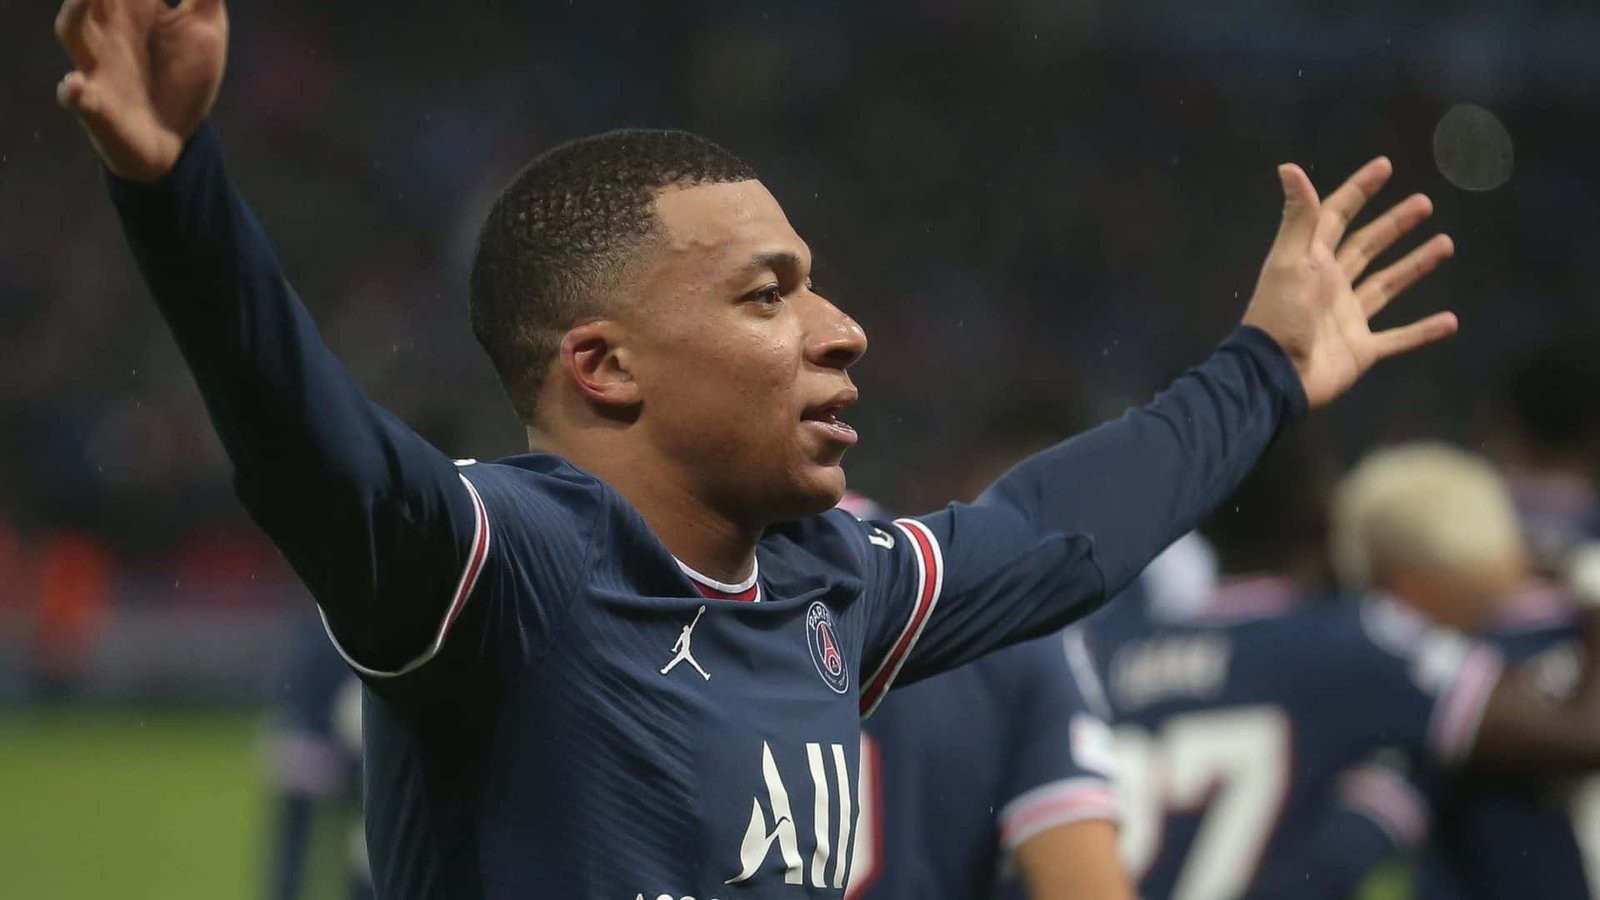 PSG considering Kylian Mbappe to be the highest-paid player in the world